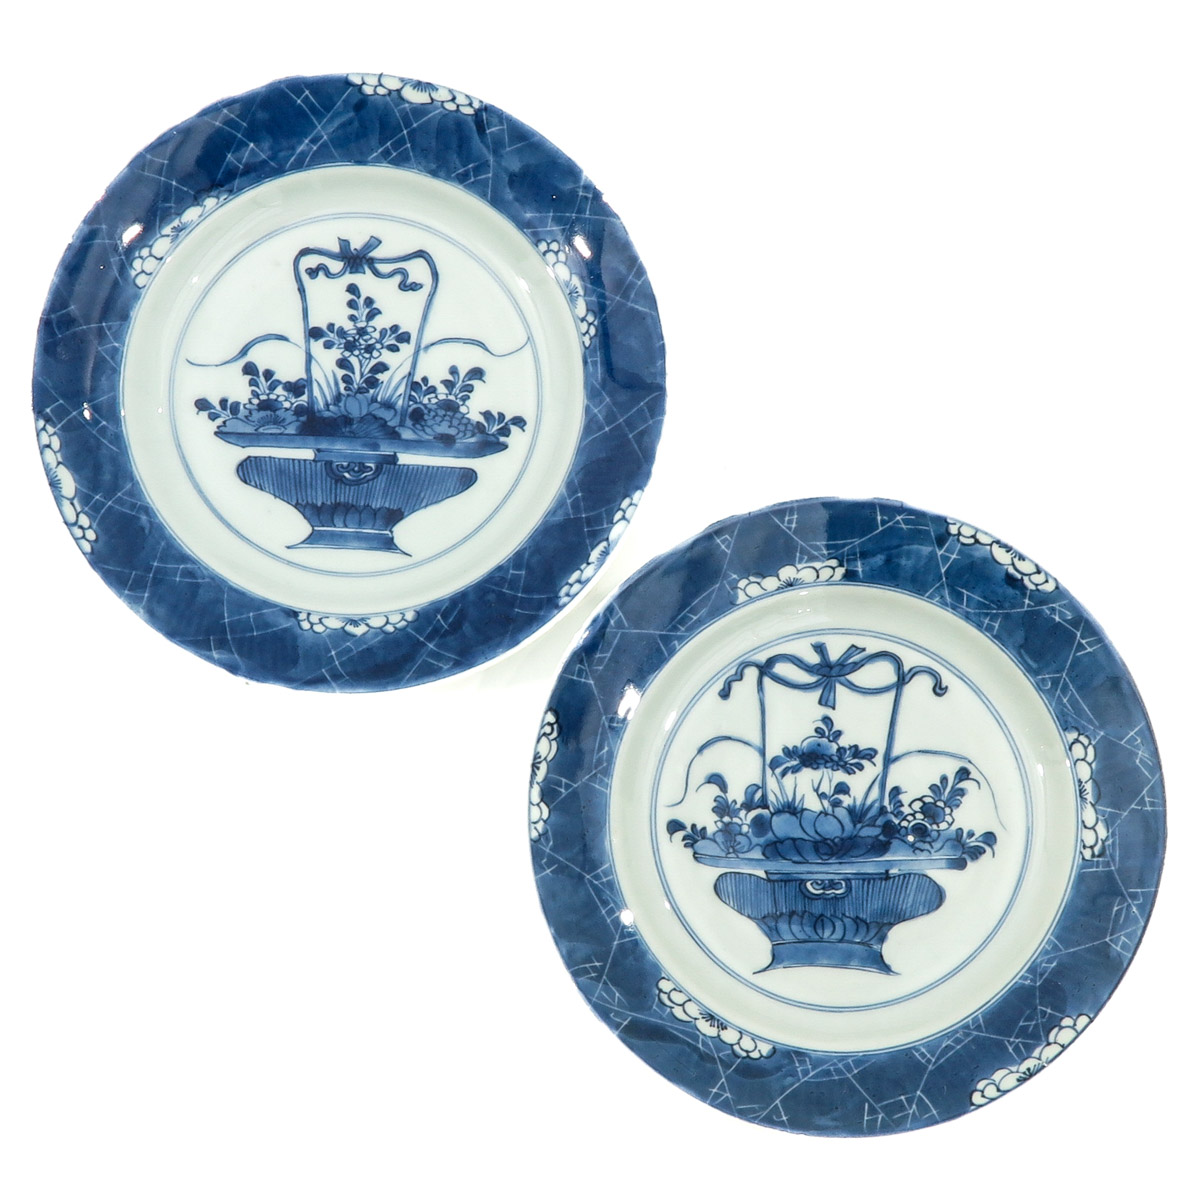 A Series of 6 Blue and White Plates - Image 7 of 10